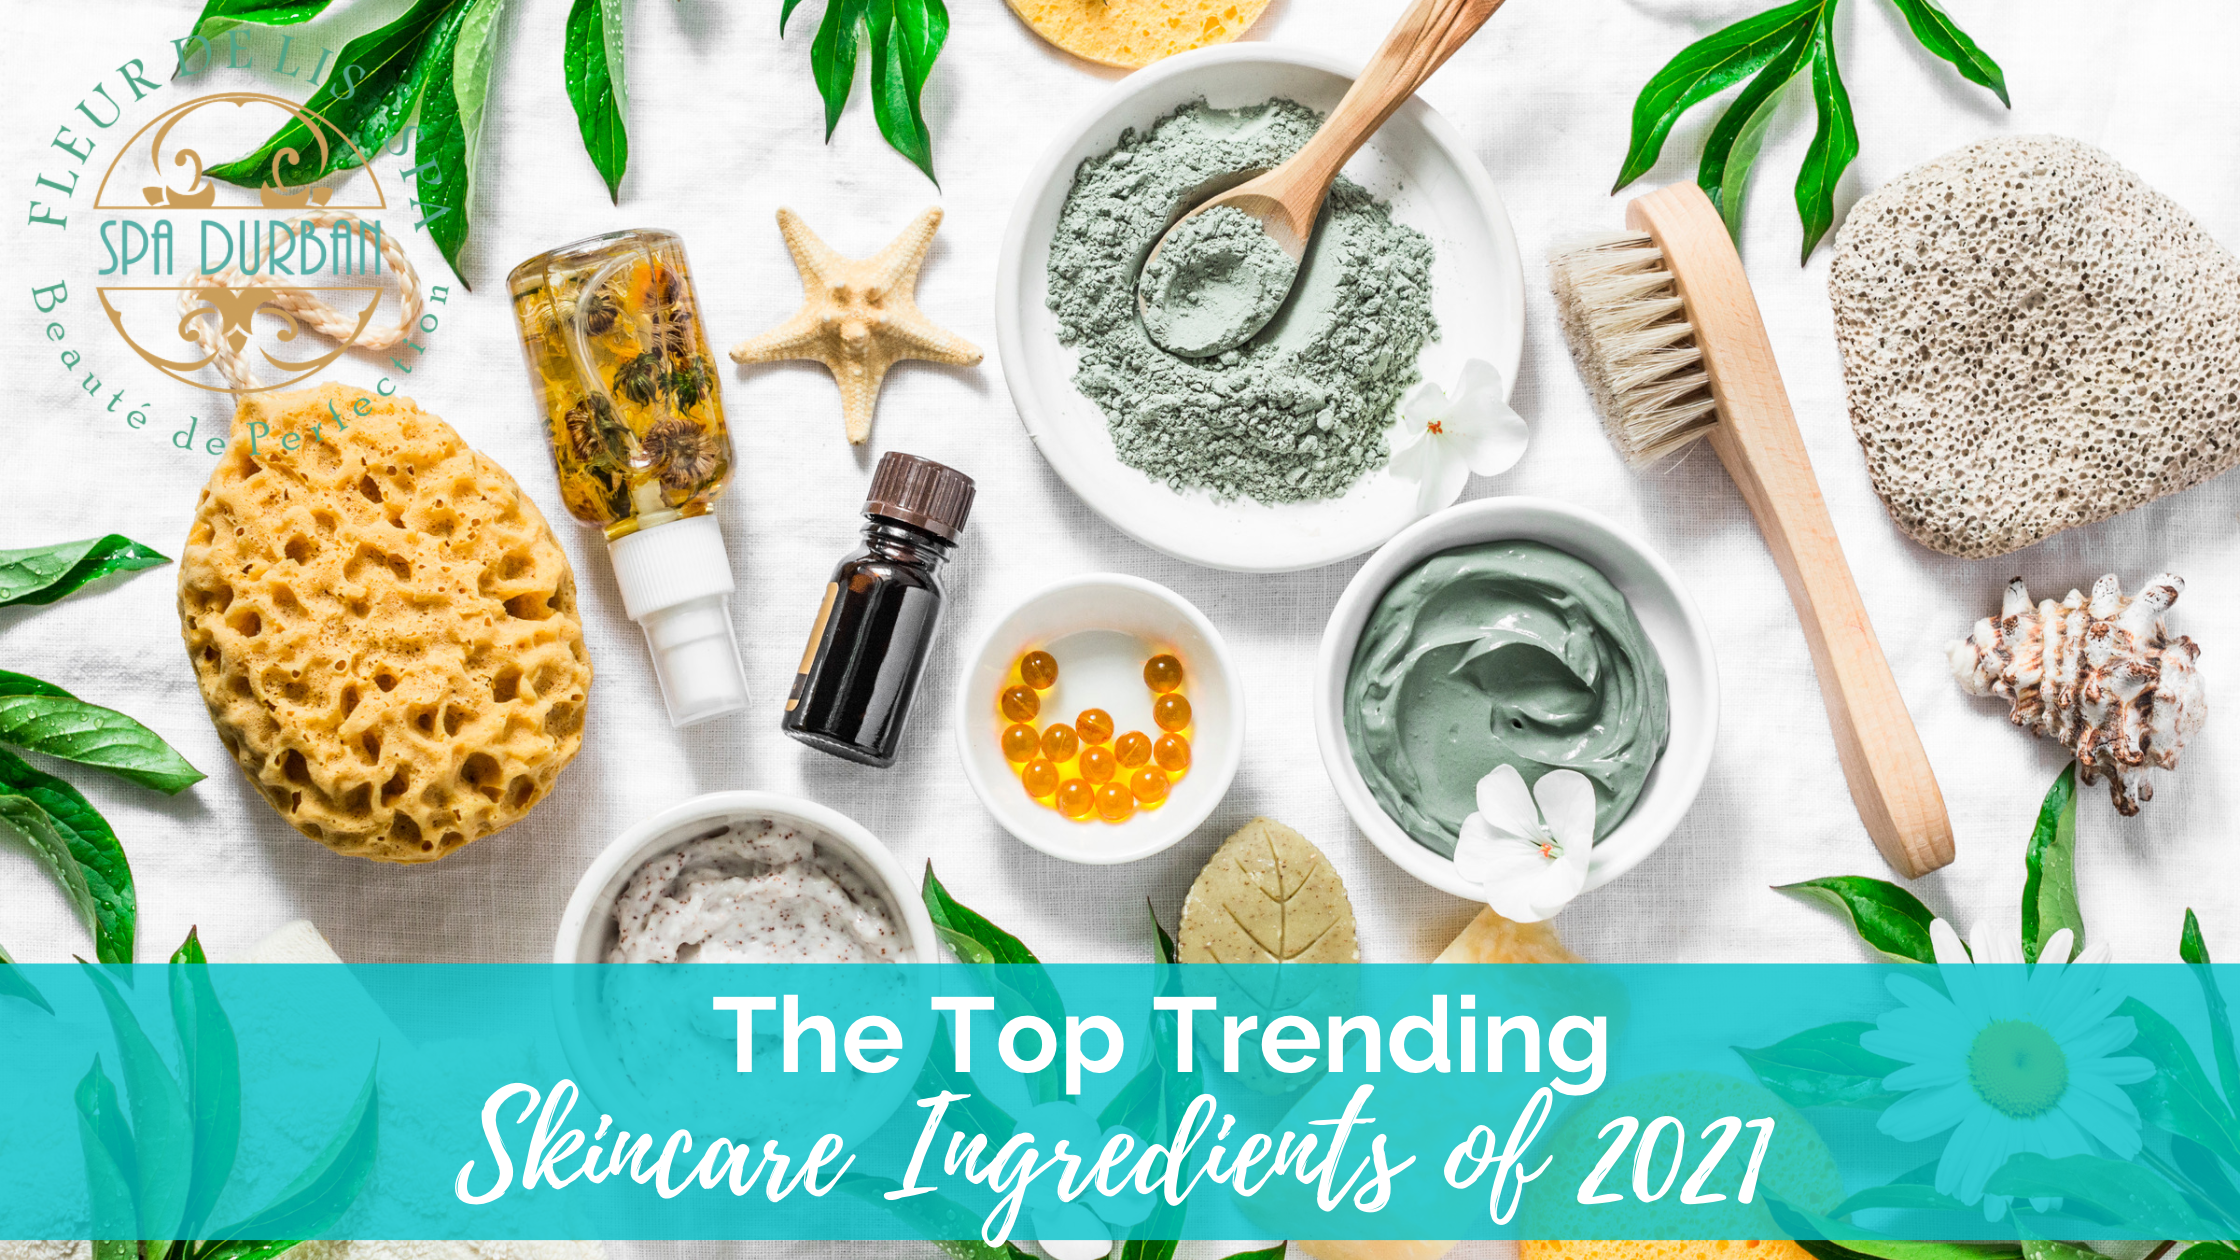 The Top Trending Skincare Ingredients of 2021: What Are They & What Do They Do?